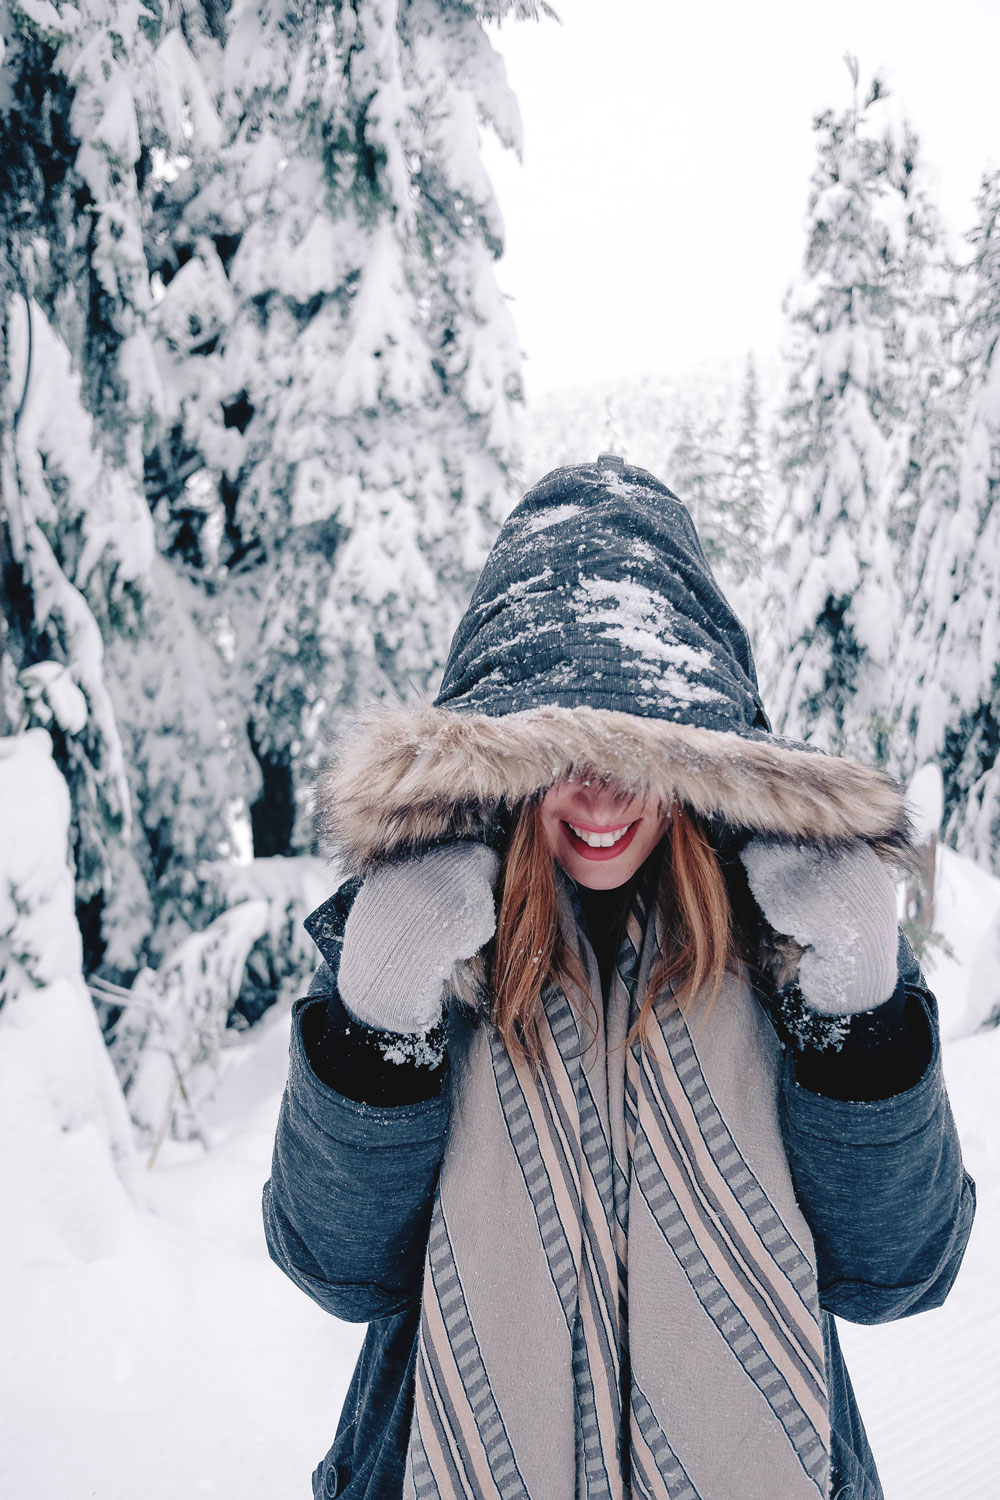 Best winter outfit ideas in the snow in Aritzia Community parka, James jeans skinny jeans, White and Warren cashmere sweater, Aritzia blanket scarf, Hershel beanie, Sorel snow boots styled by To Vogue or Bust at Grouse Mountain, Vancouver